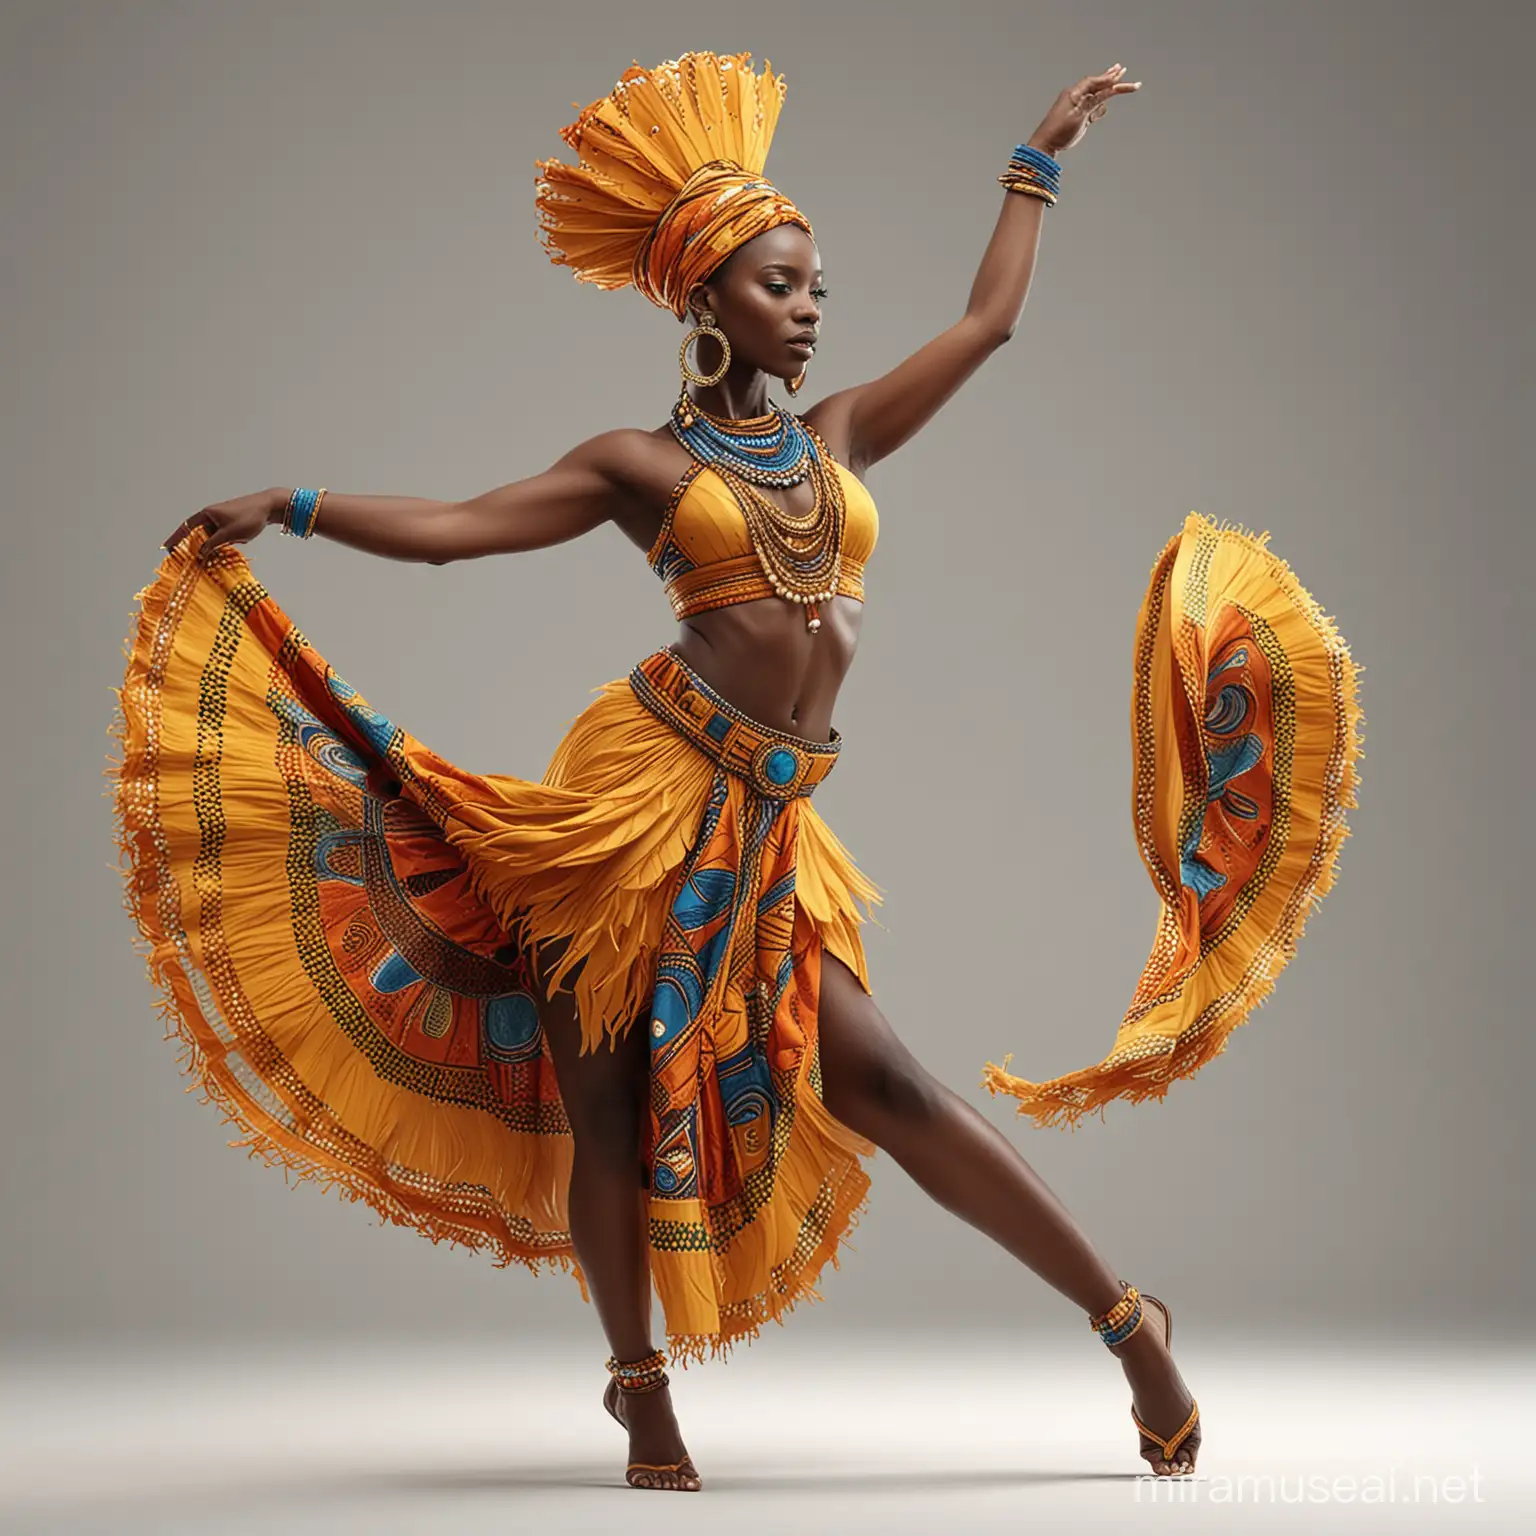 Energetic African Dancer Illustration with Vibrant Traditional Costume